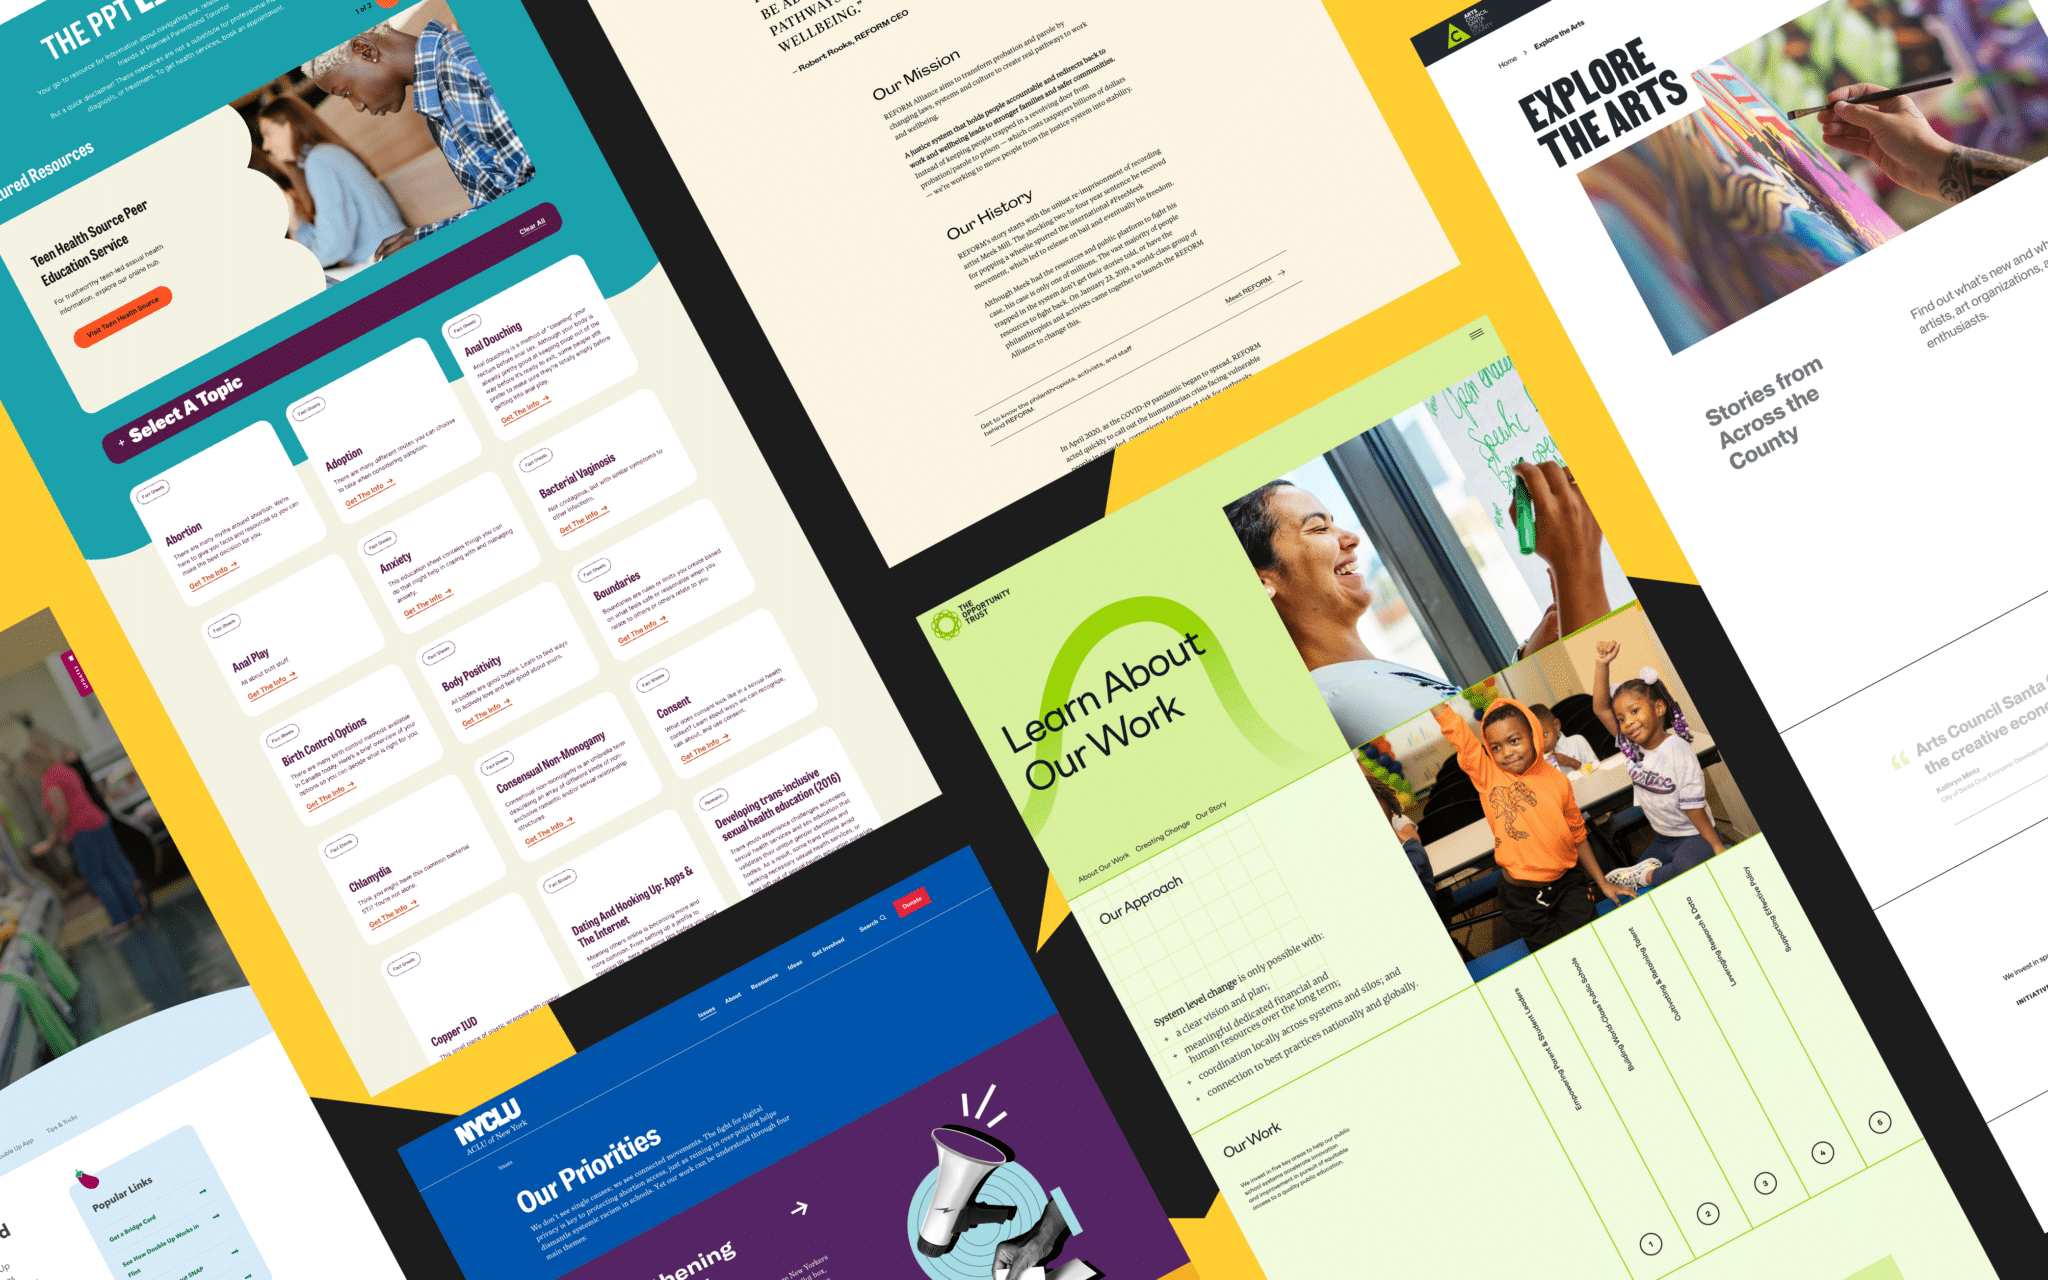 A collection of nonprofit website designs on a black and yellow background.